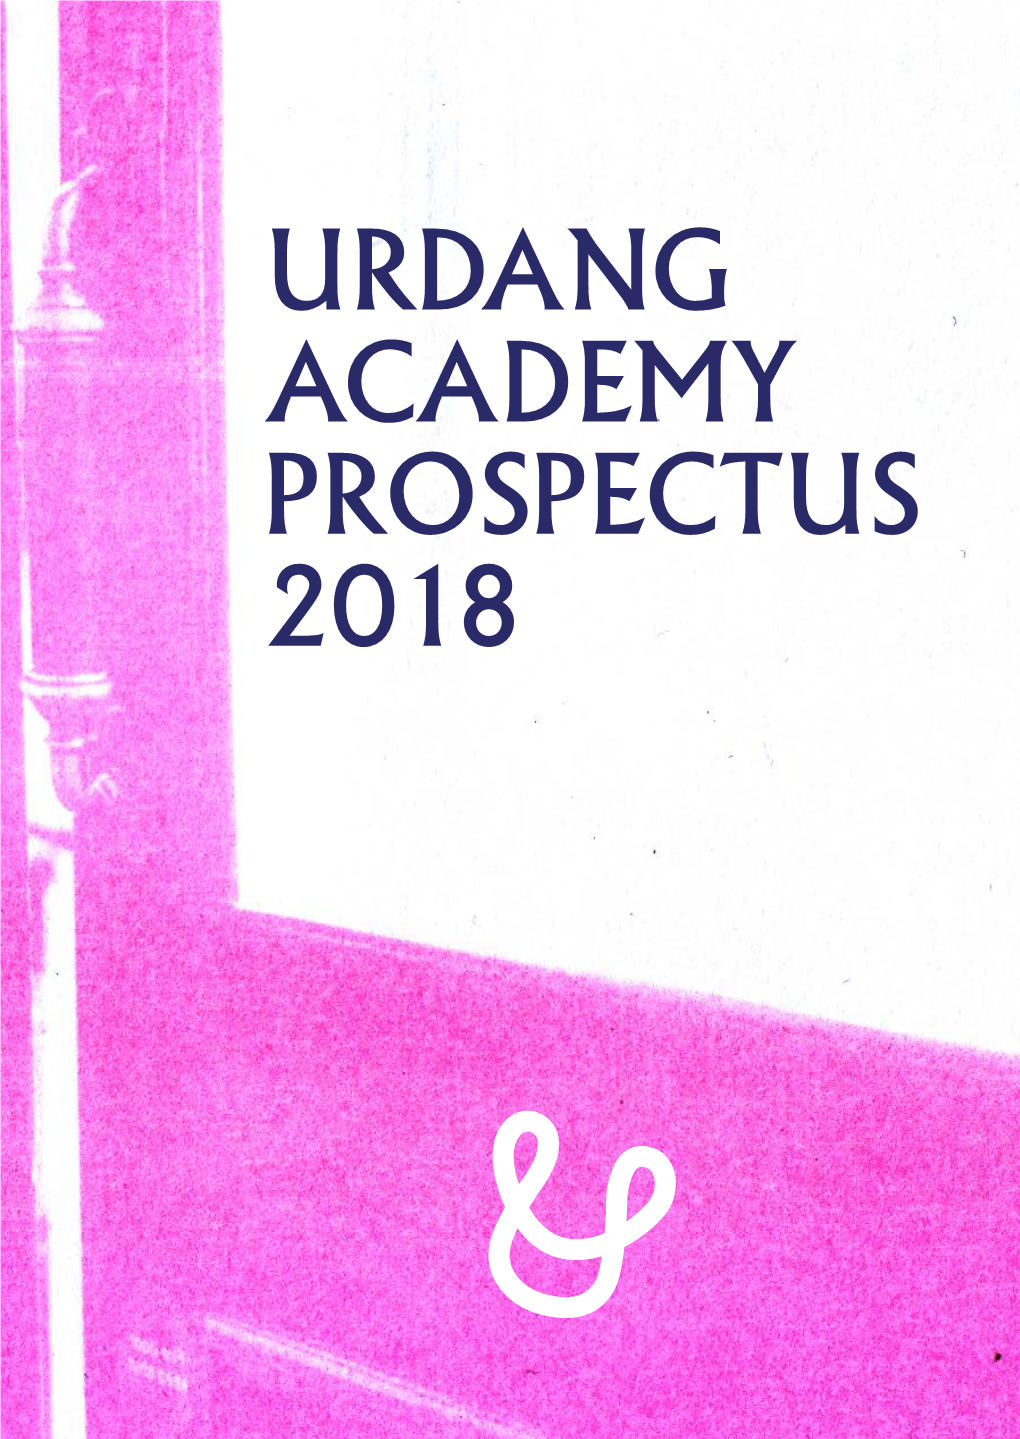 URDANG ACADEMY PROSPECTUS 2018 SUCCESS Life After Graduation Continues to Be Positive for Urdang’S Students Gaining Employment in the West End and Beyond